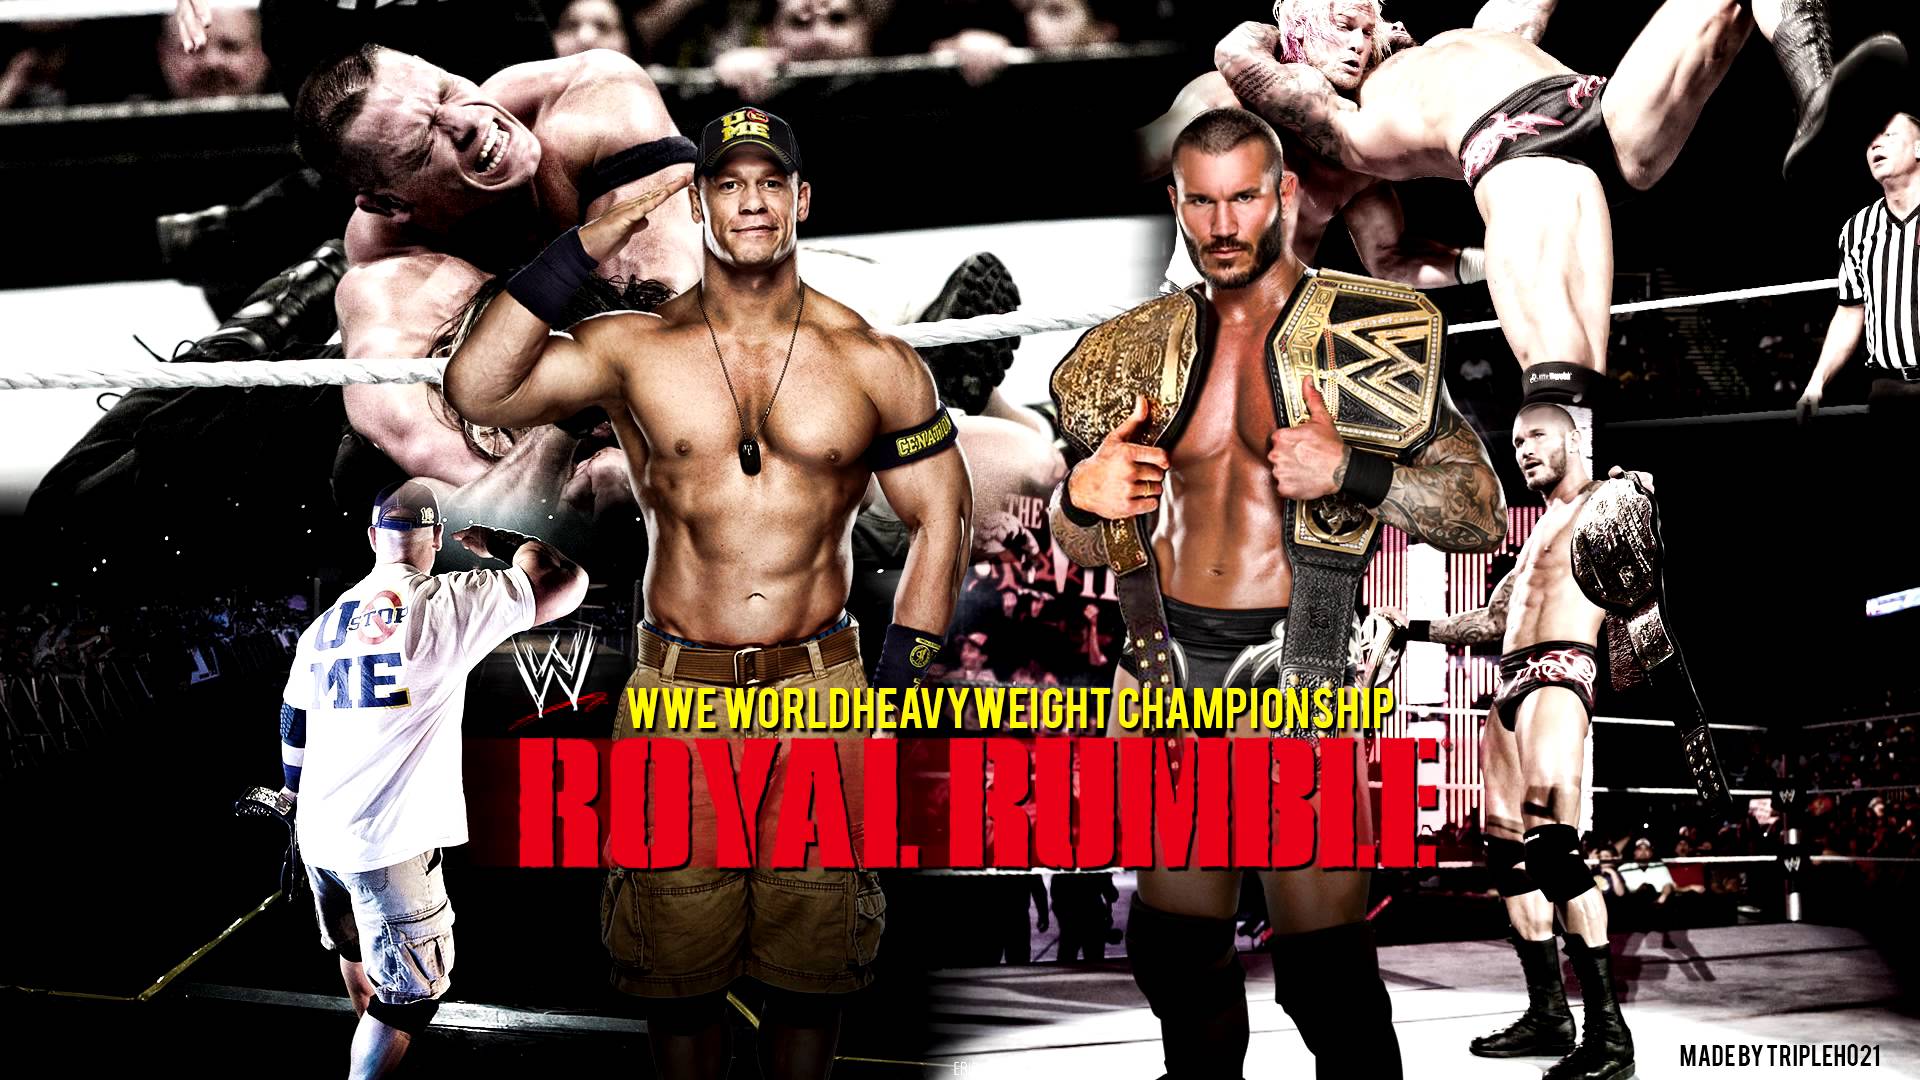 WWE Royal Rumble 2014 Official Themesong.